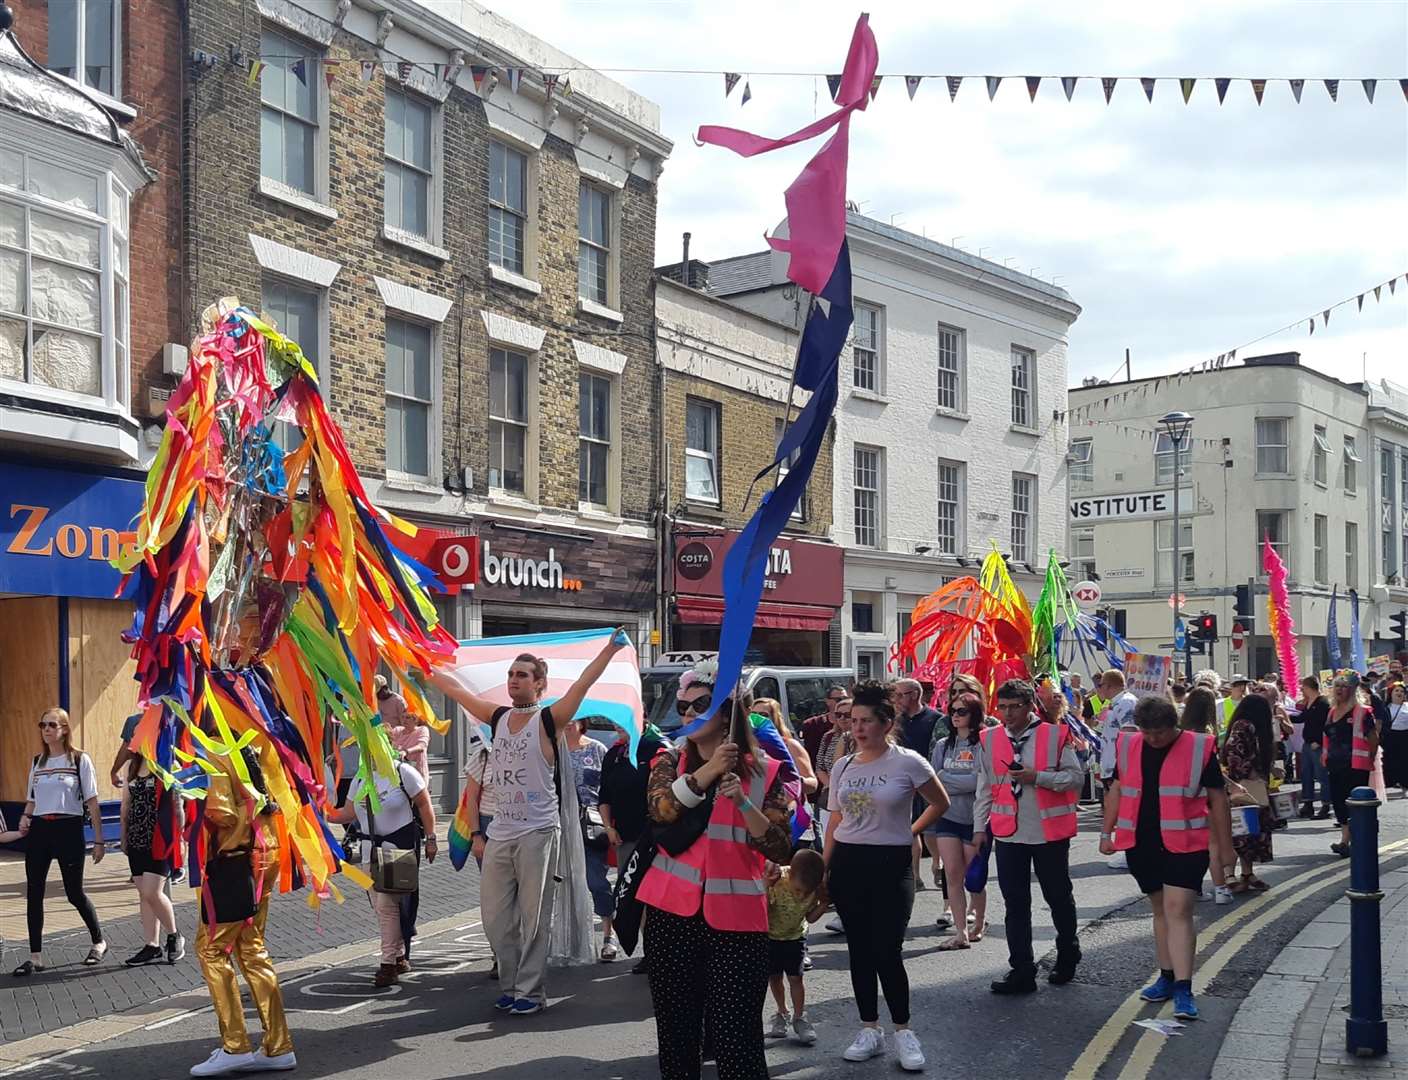 People flying flags marched through the streets of Dover (15960161)